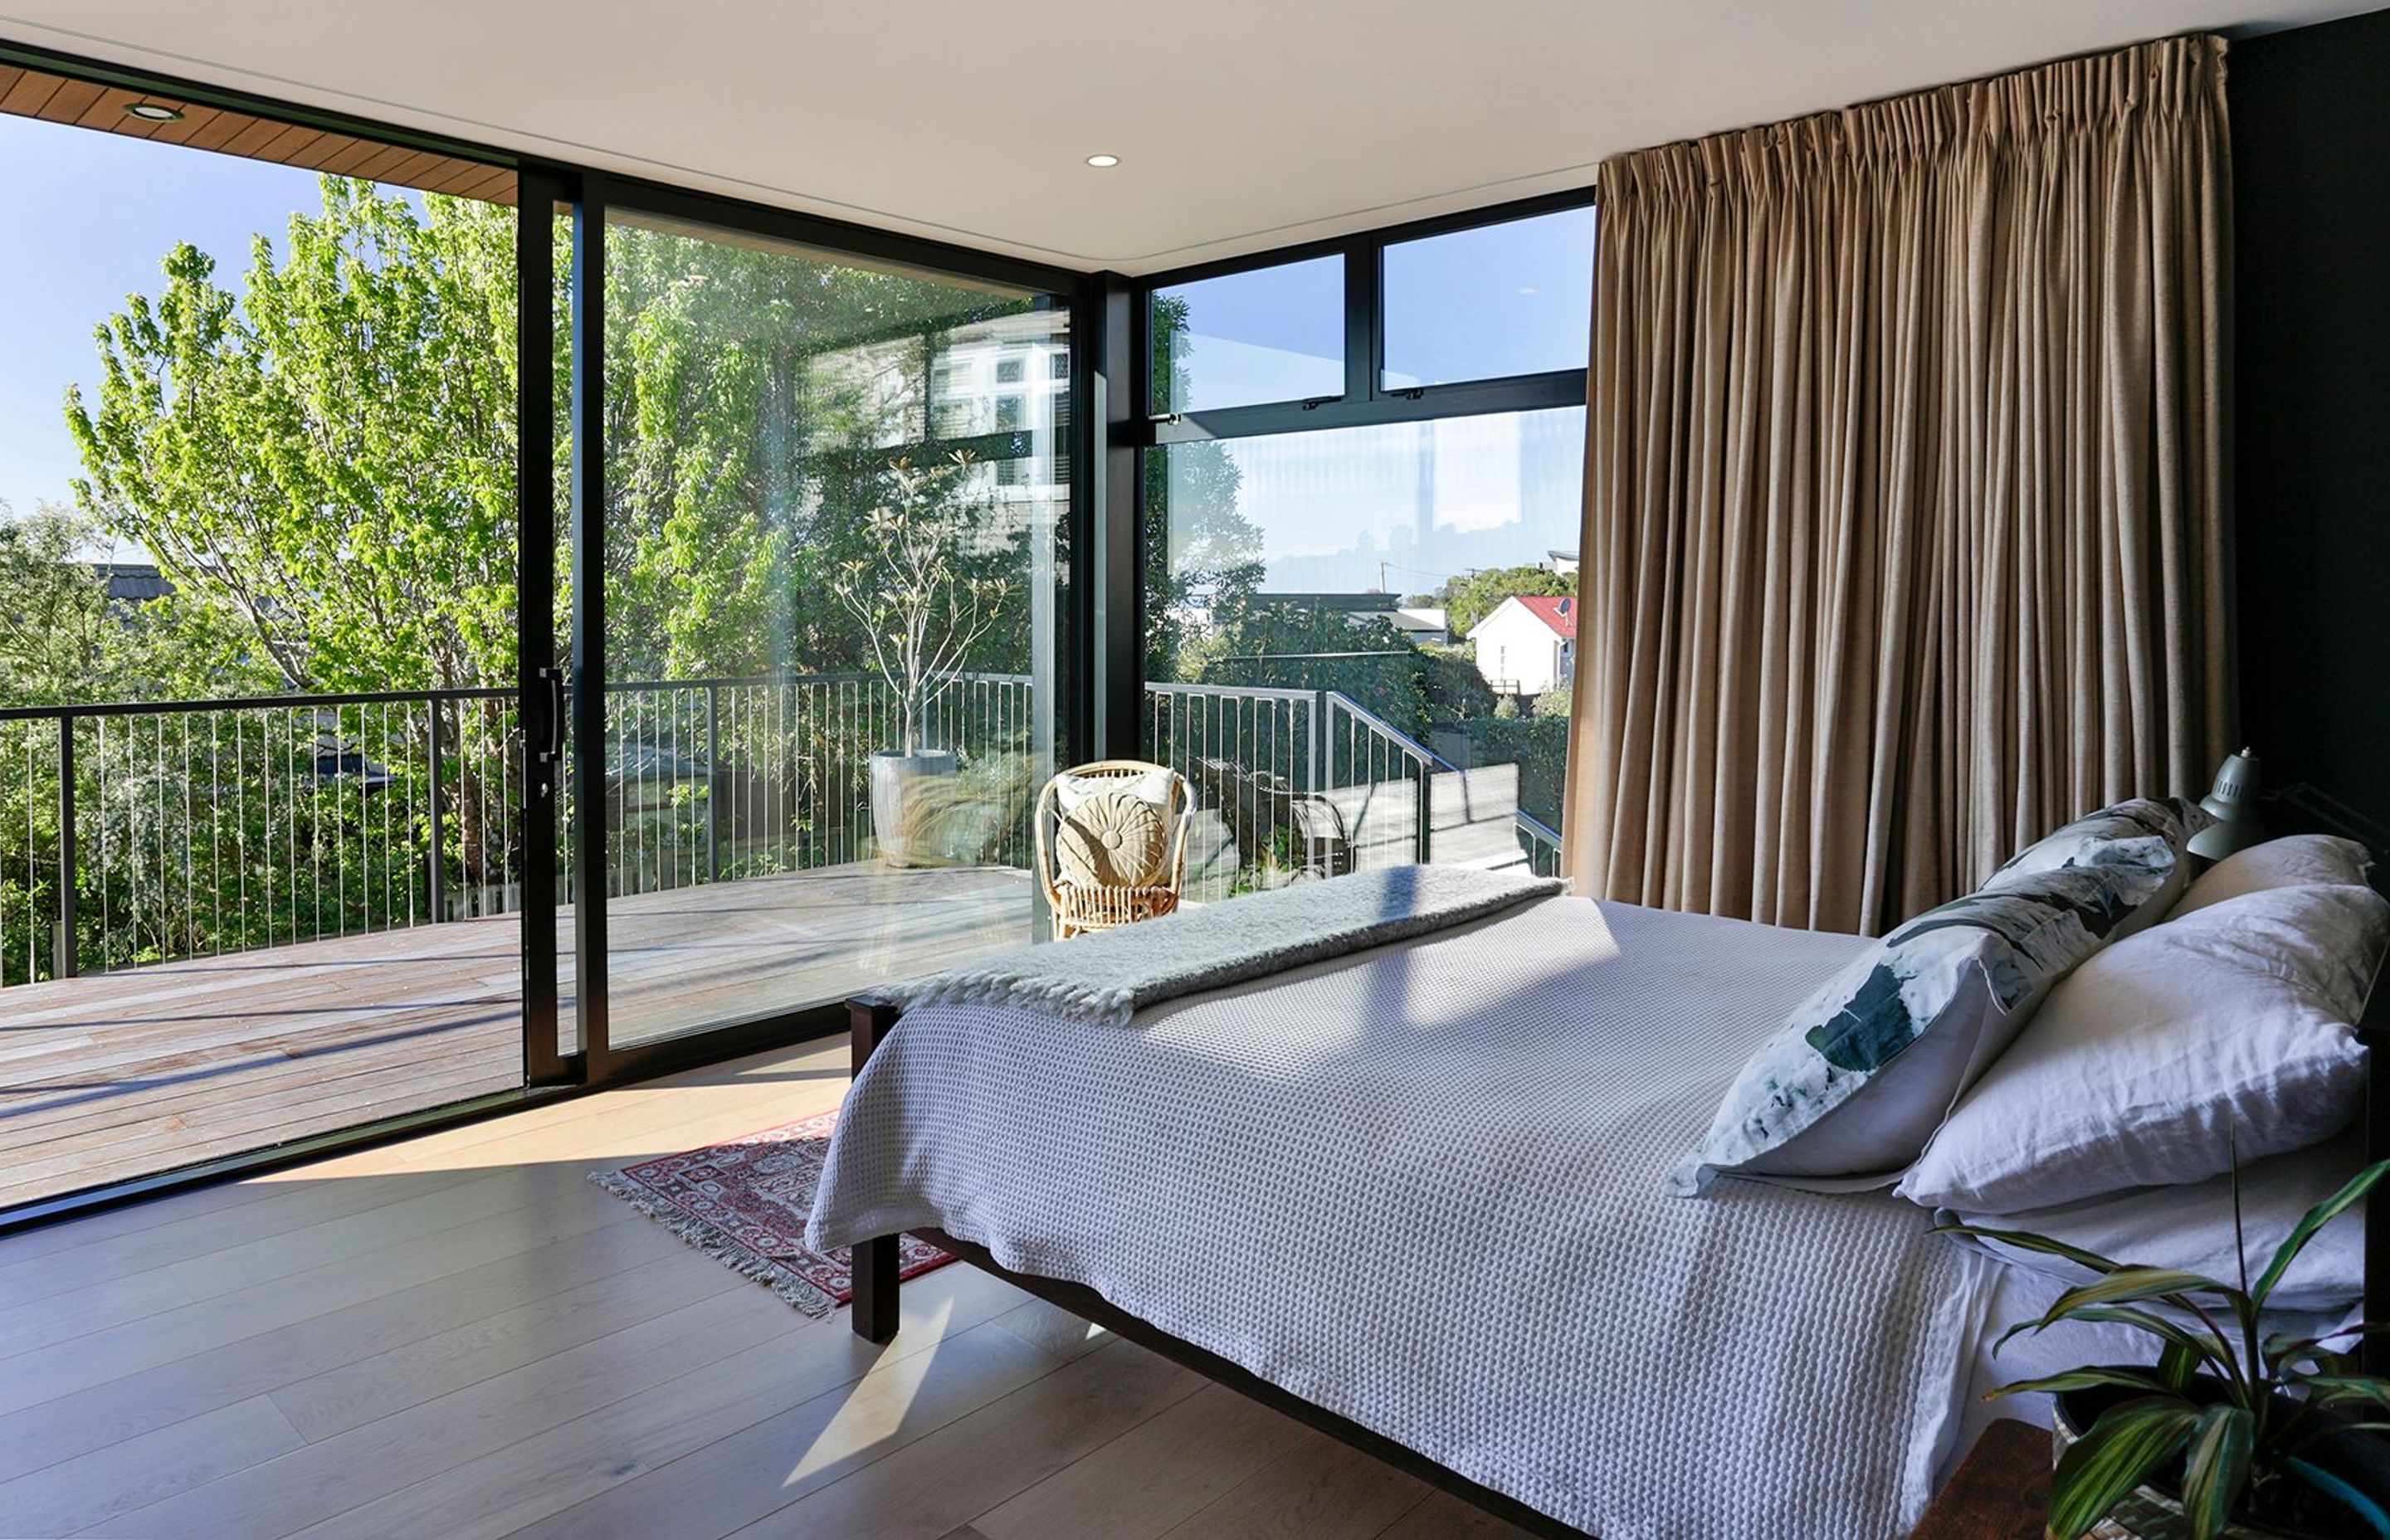 The bedroom opens up onto the main deck and the view.